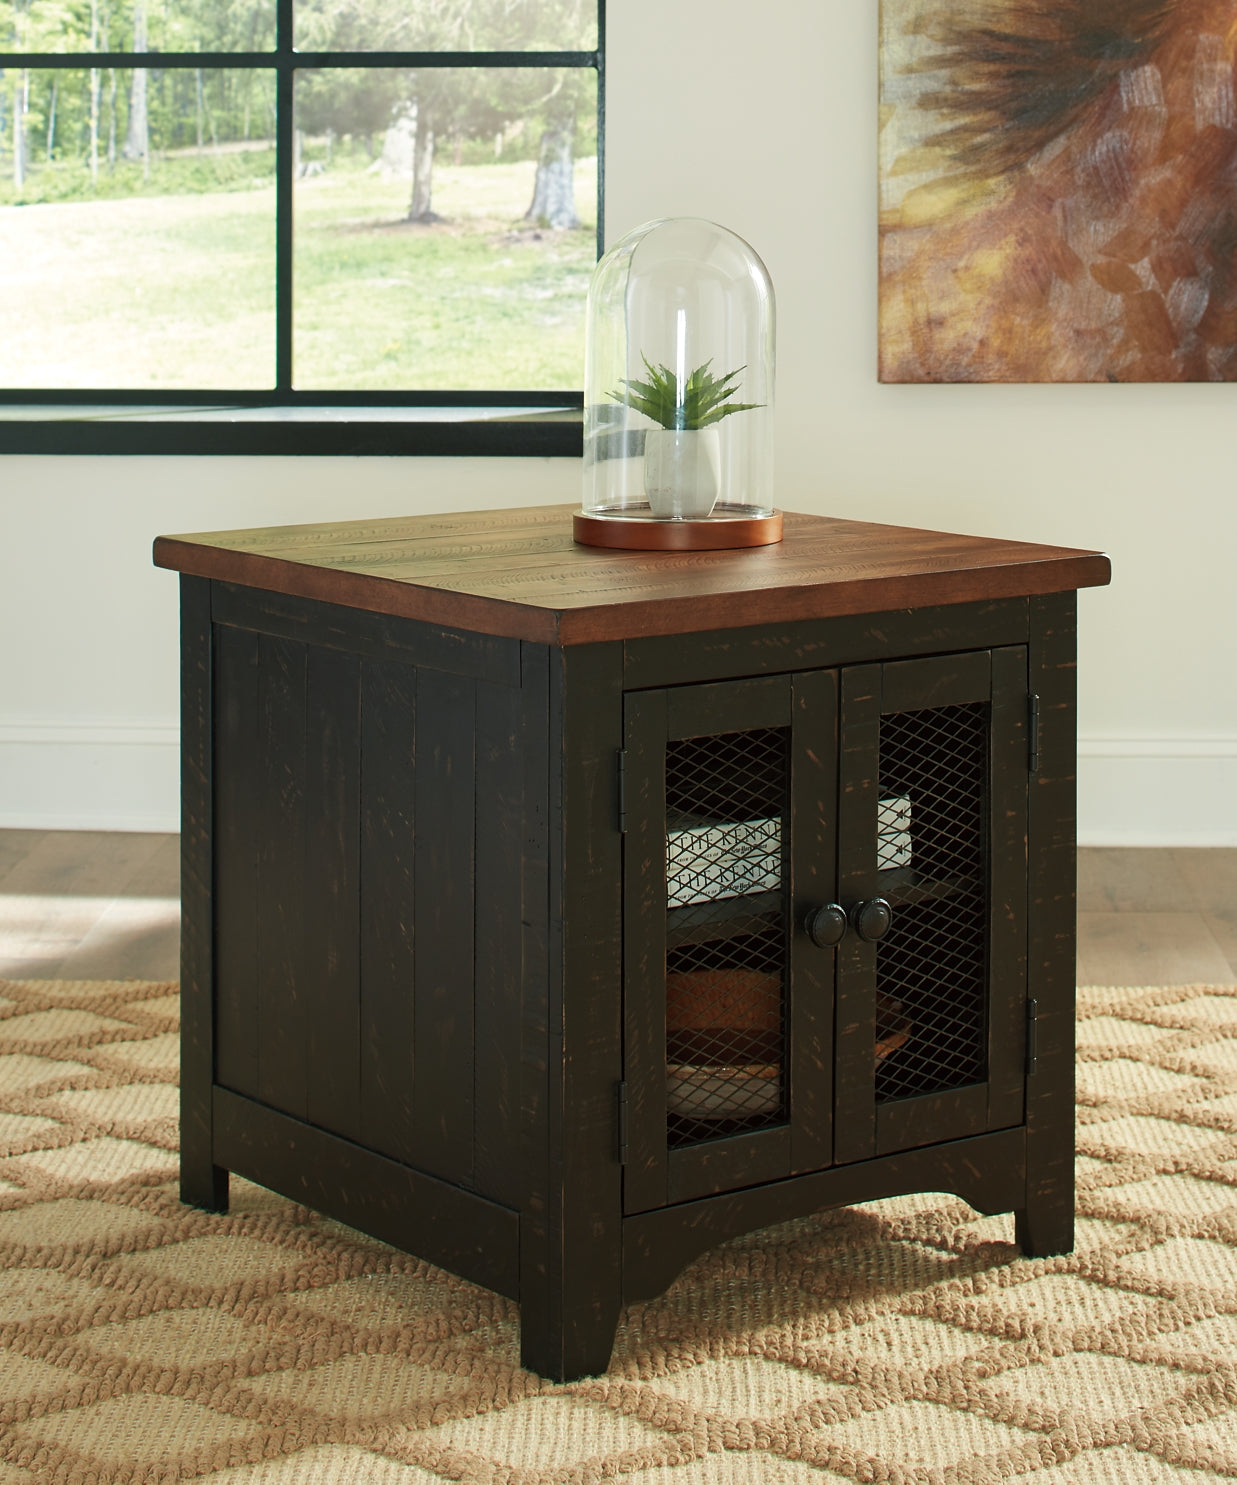 Valebeck 2 End Tables Rent Wise Rent To Own Jacksonville, Florida